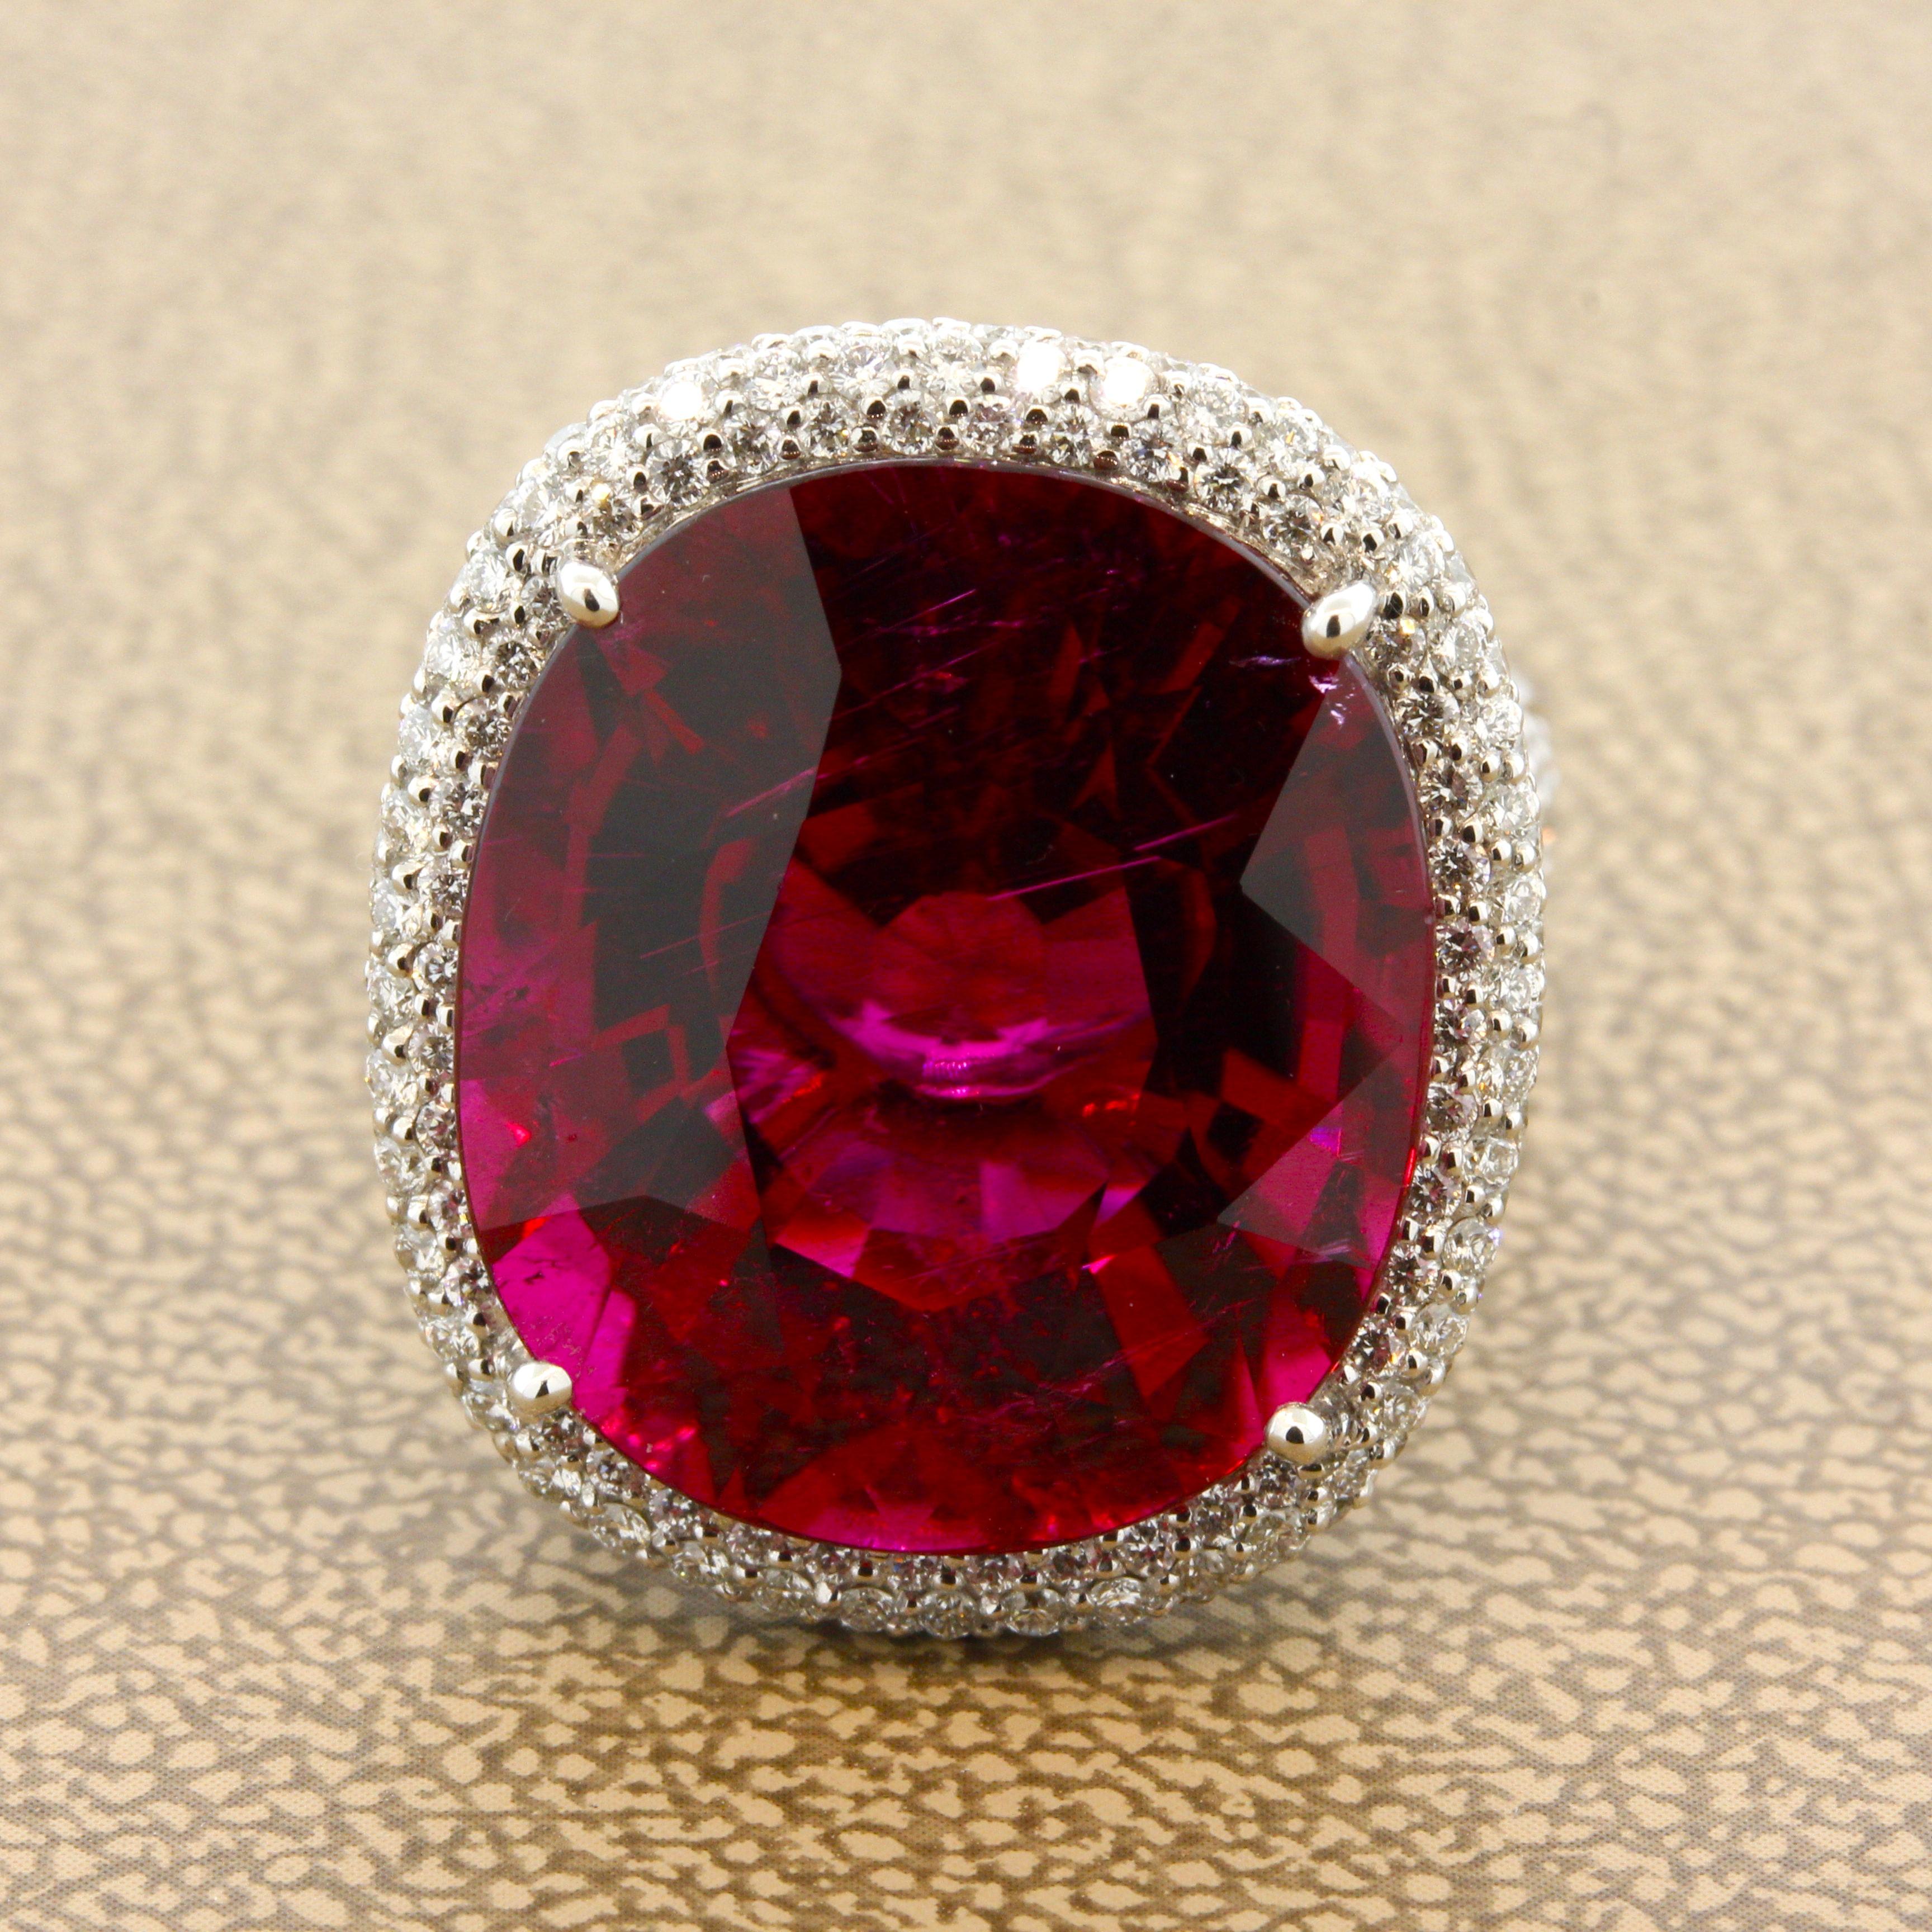 As good as it gets, this gem tourmaline weighs an impressive 18.71 carats. It has a rich intense royal red color with excellent clarity, one of the finest rubellites we have ever seen. It will rival any pigeon blood ruby on the market and its size